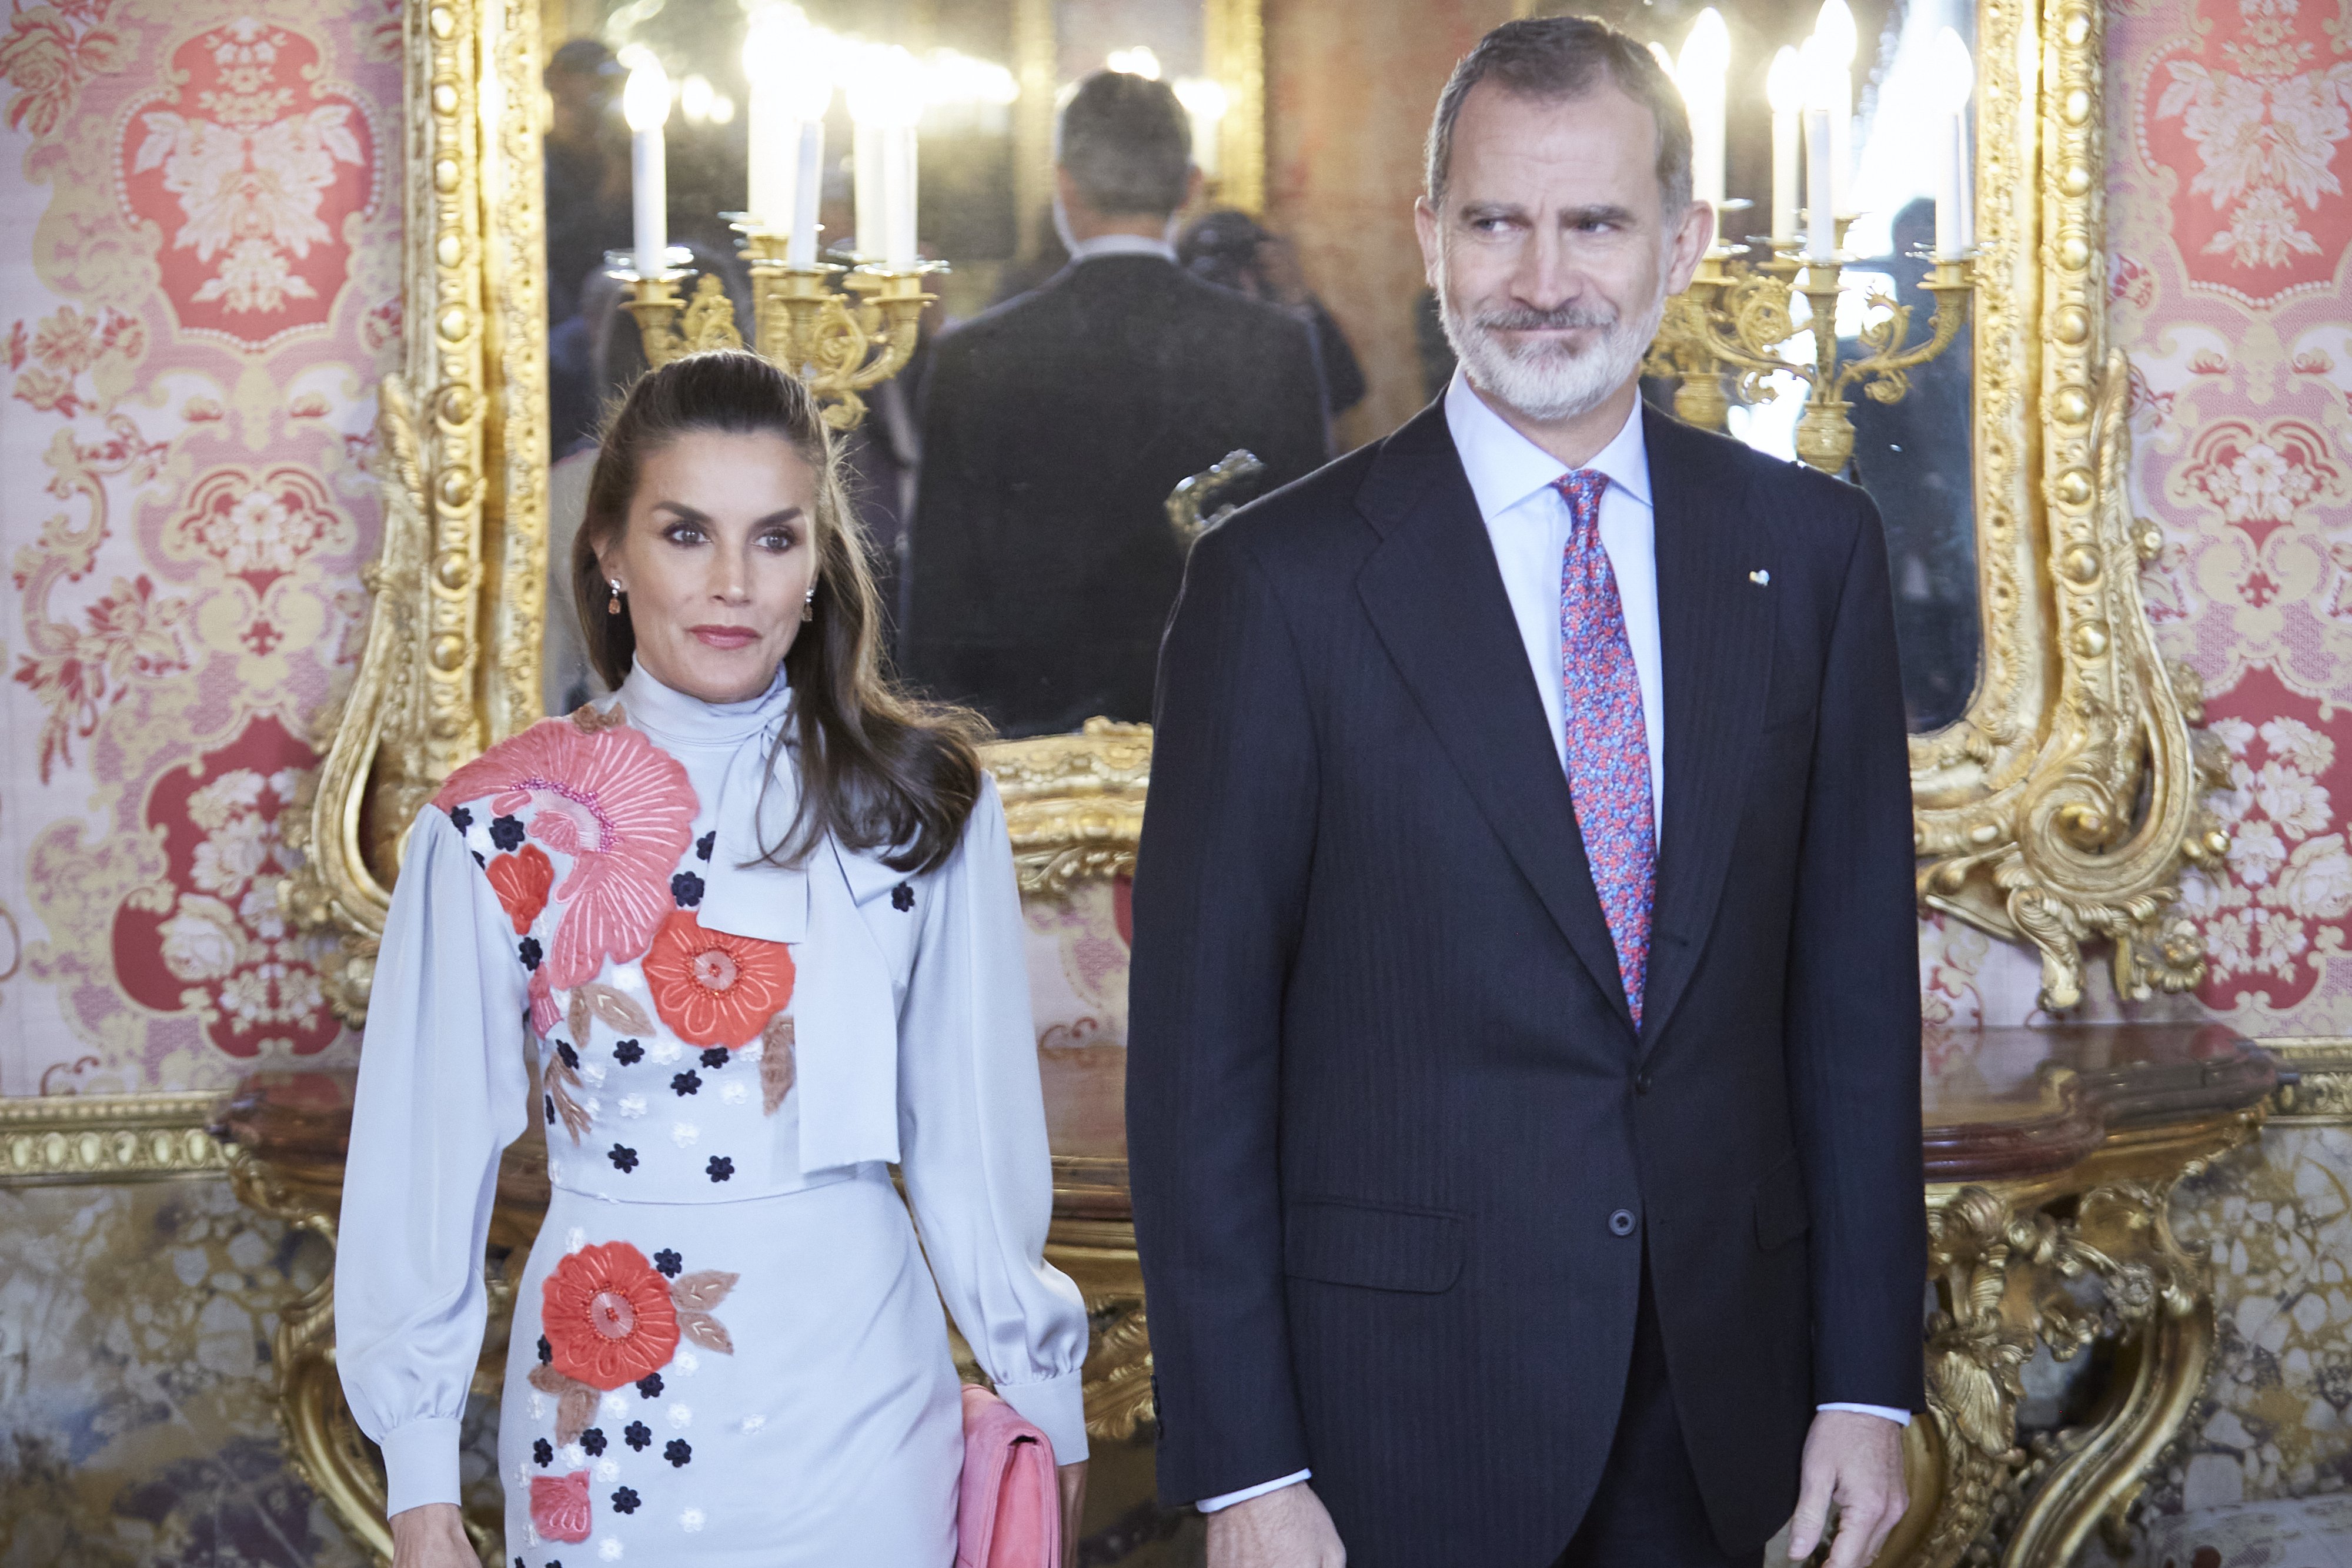 King Felipe and Queen Letizia attending a luncheon at the Royal Palace on April 21, 2022 in Madrid, Spain. / Source: Getty Images